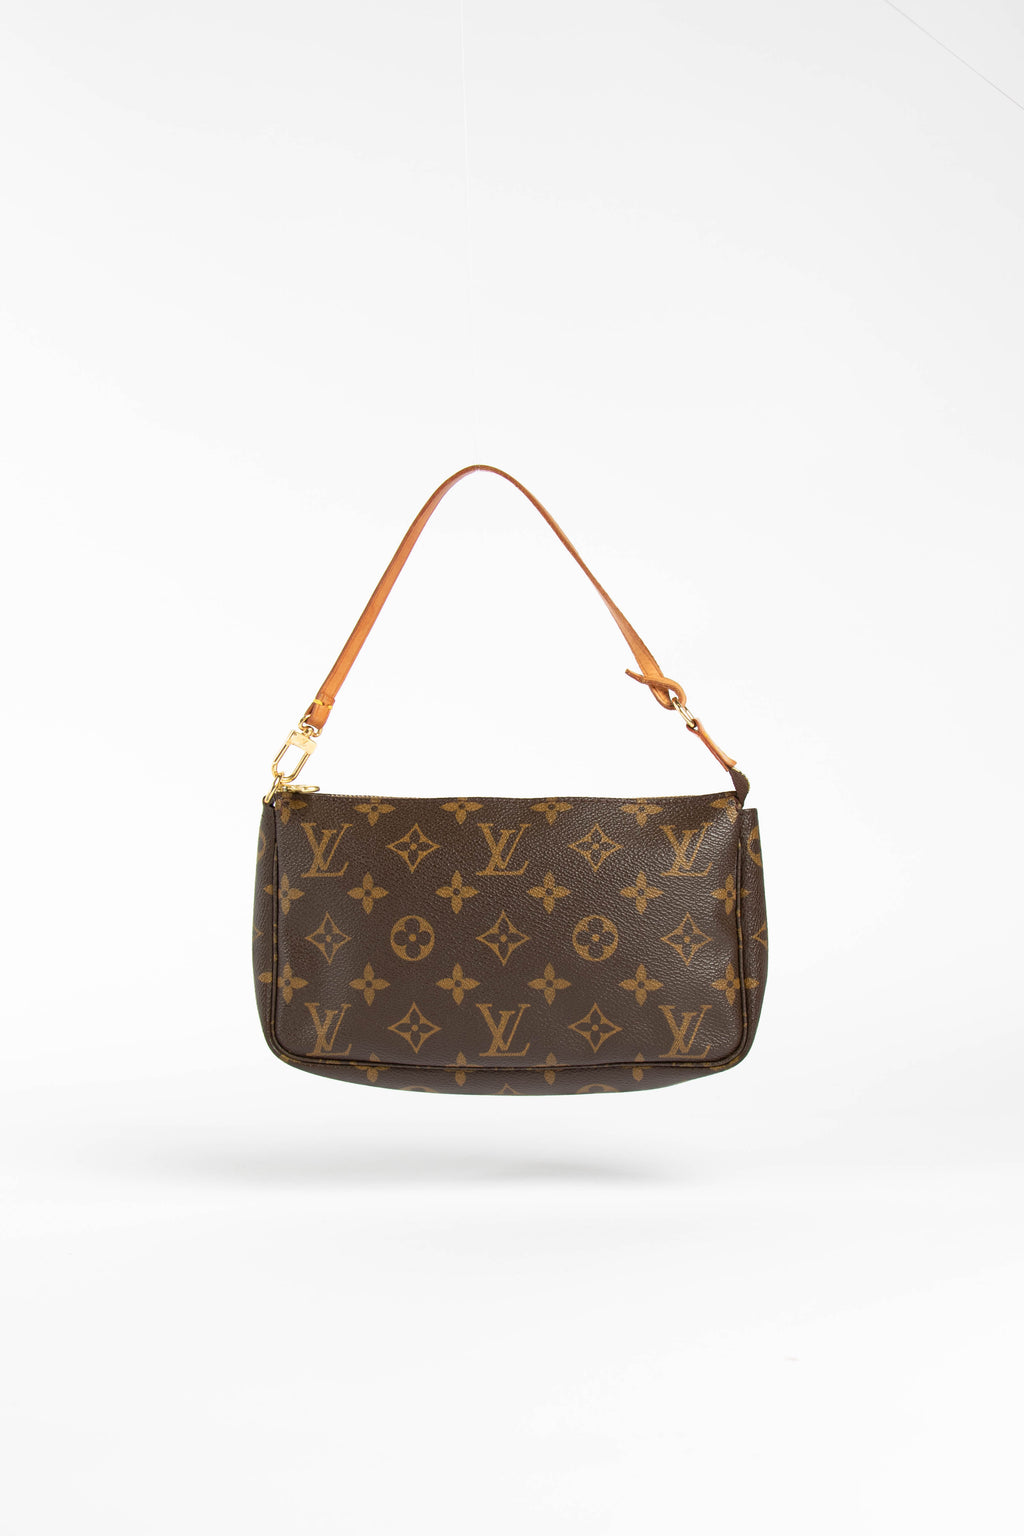 Archive – tagged Louis Vuitton – QUEEN MAY